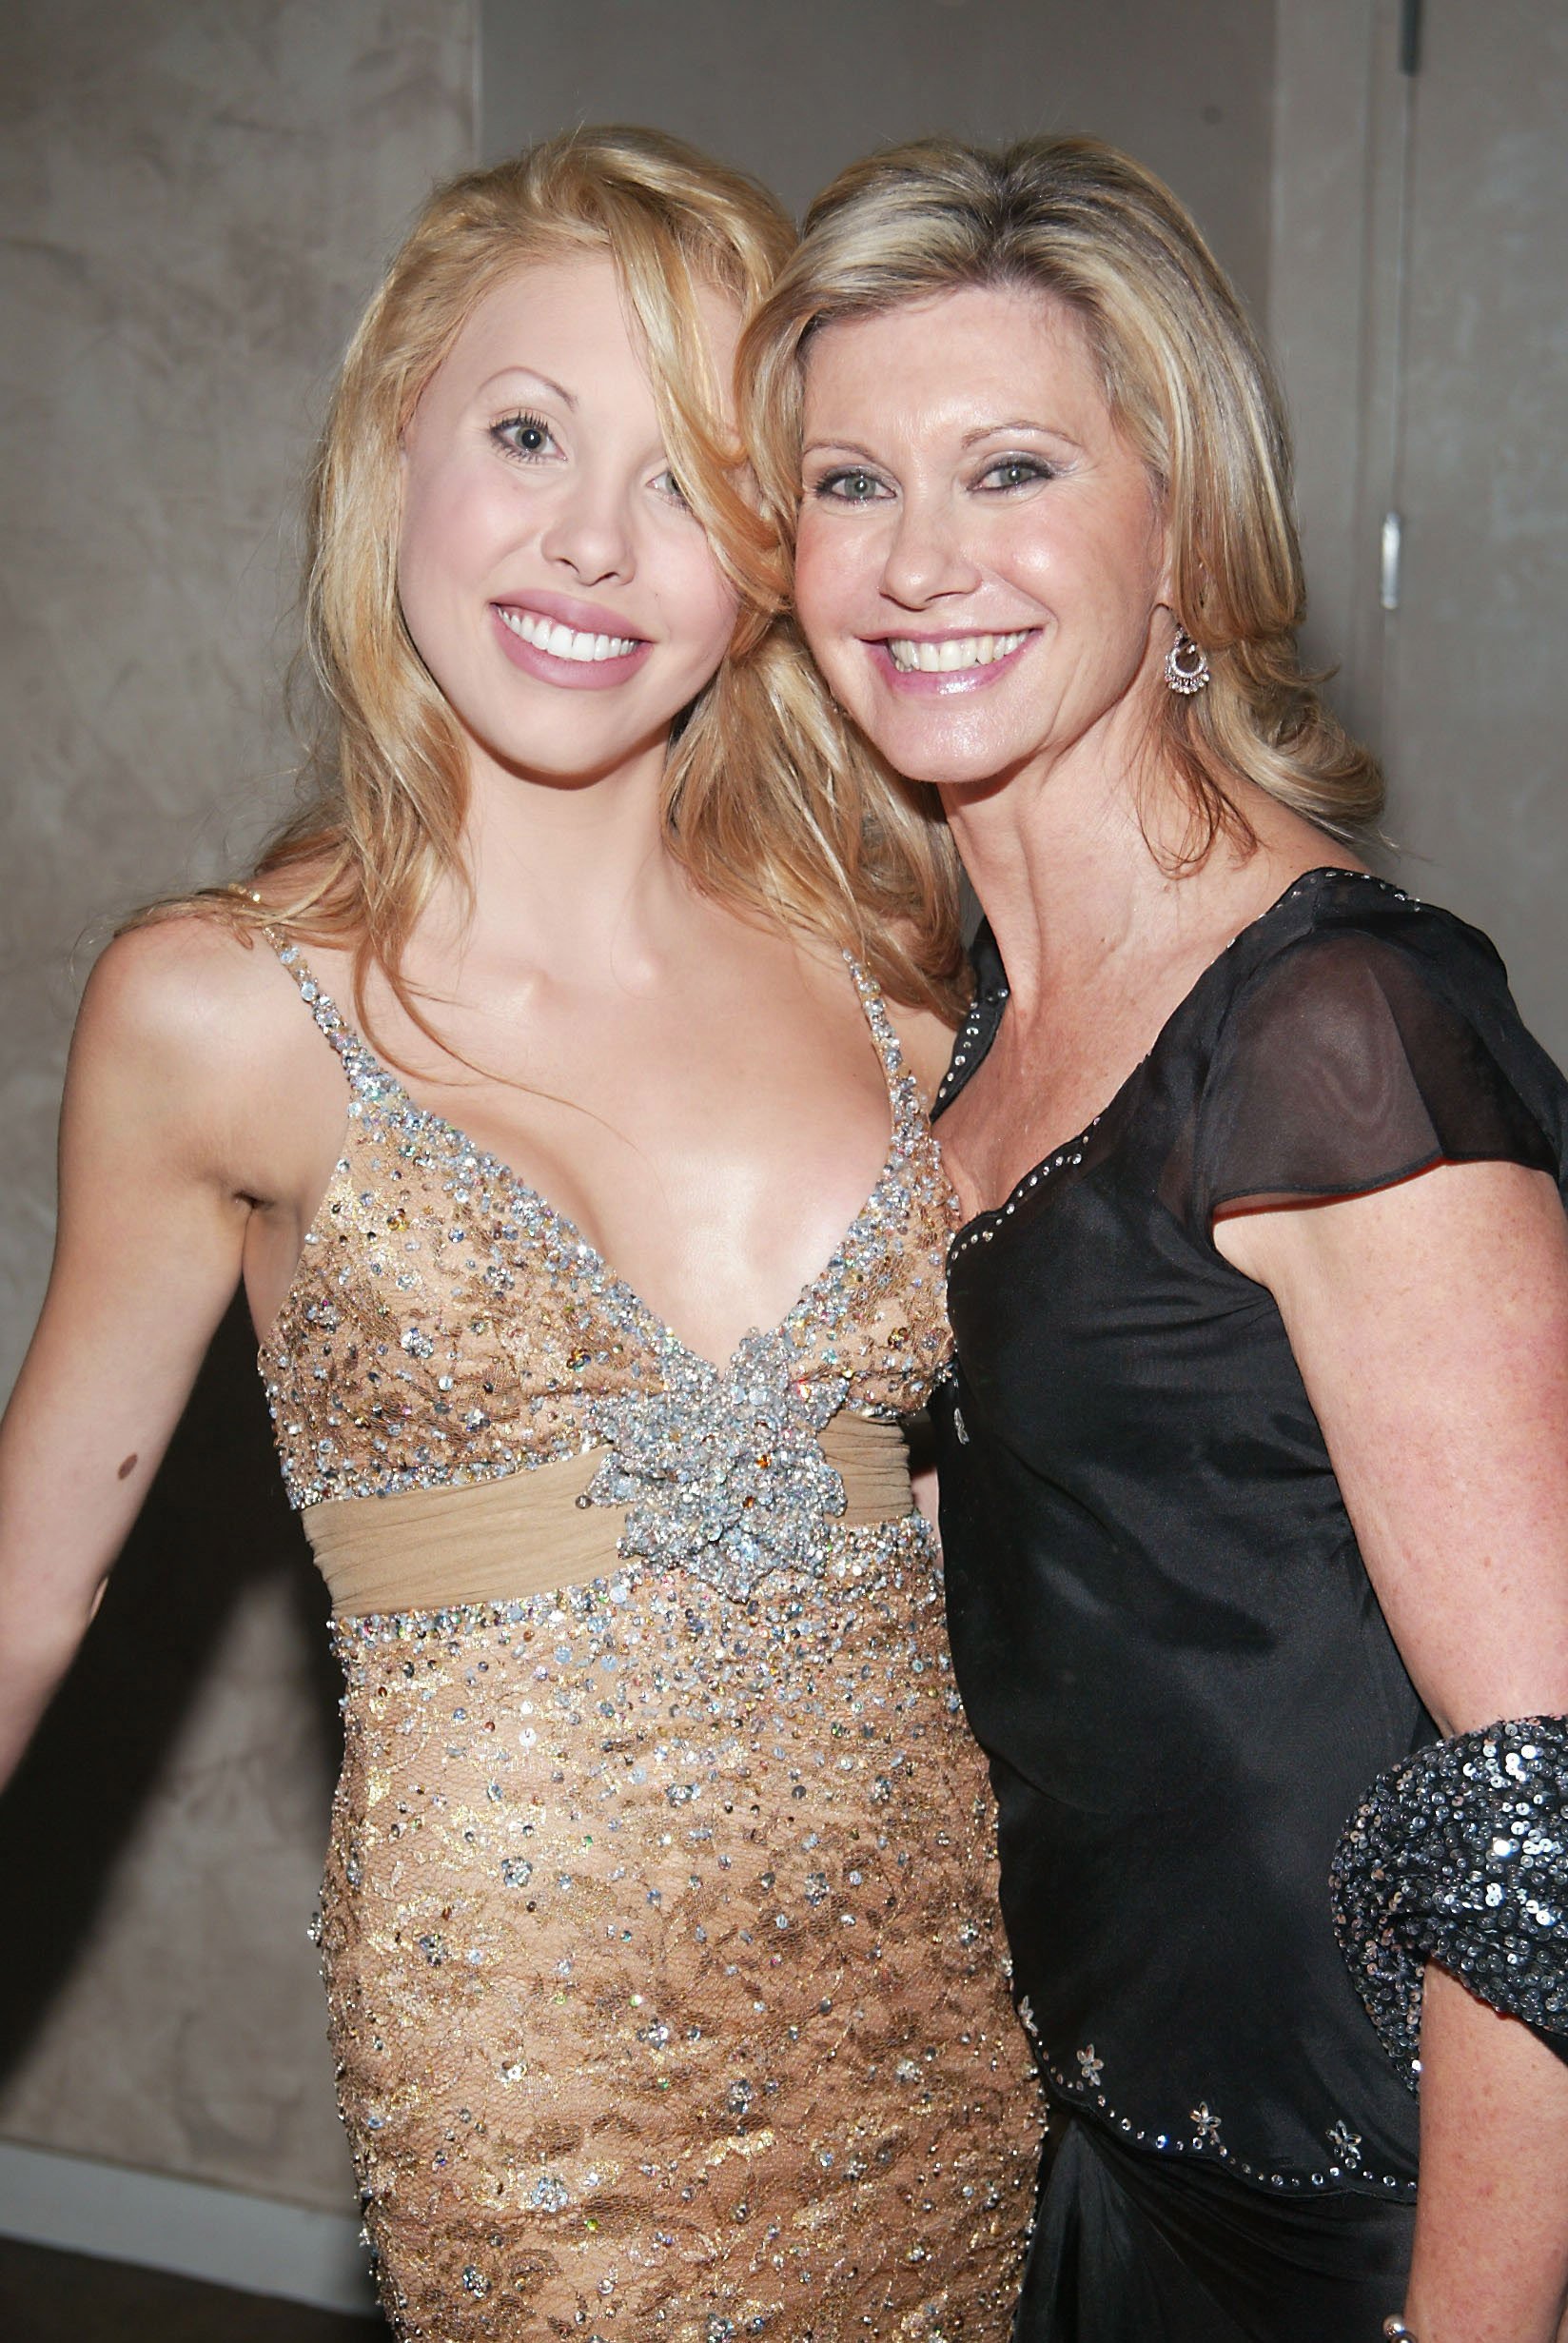 Chloe Lattanzi and Olivia Newton-John at the Universal Music Group Country Music Awards after party on November 15, 2005 | Source: Getty Images